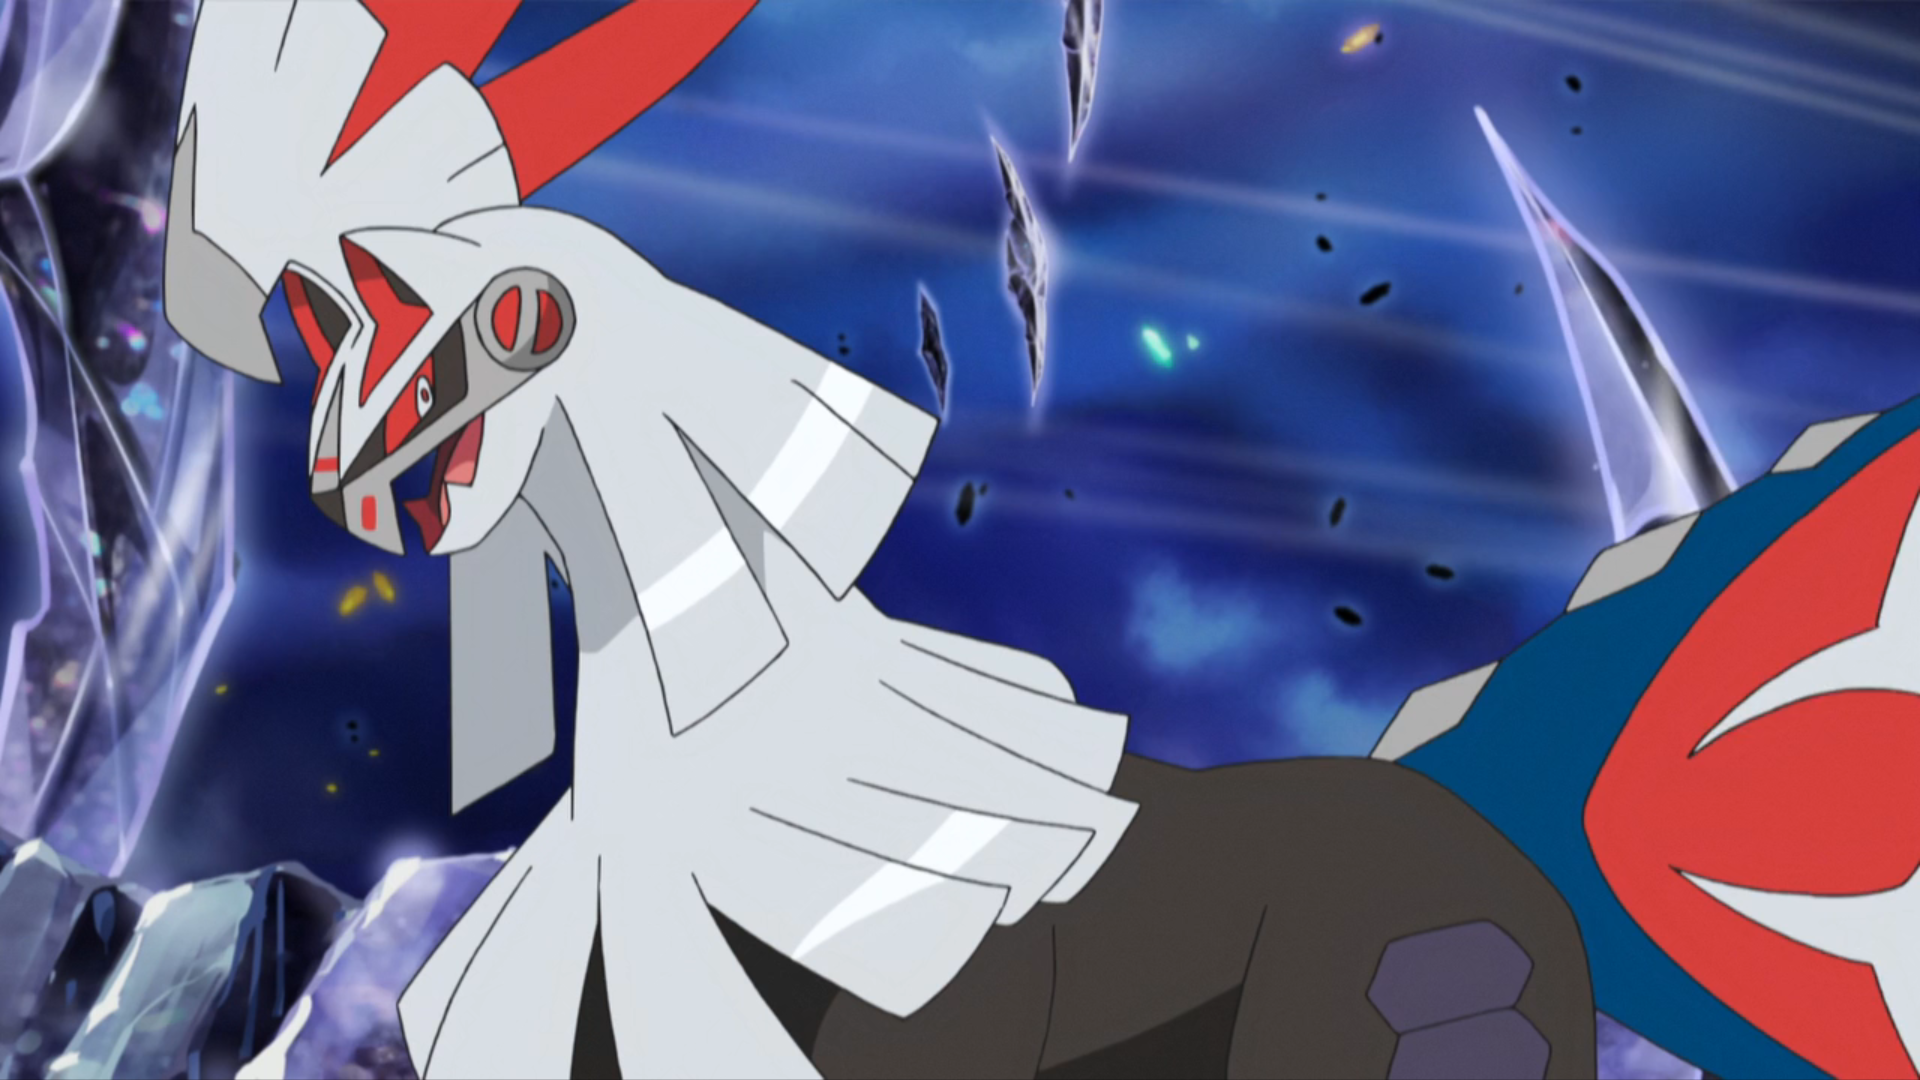 Silvally Hd Wallpapers